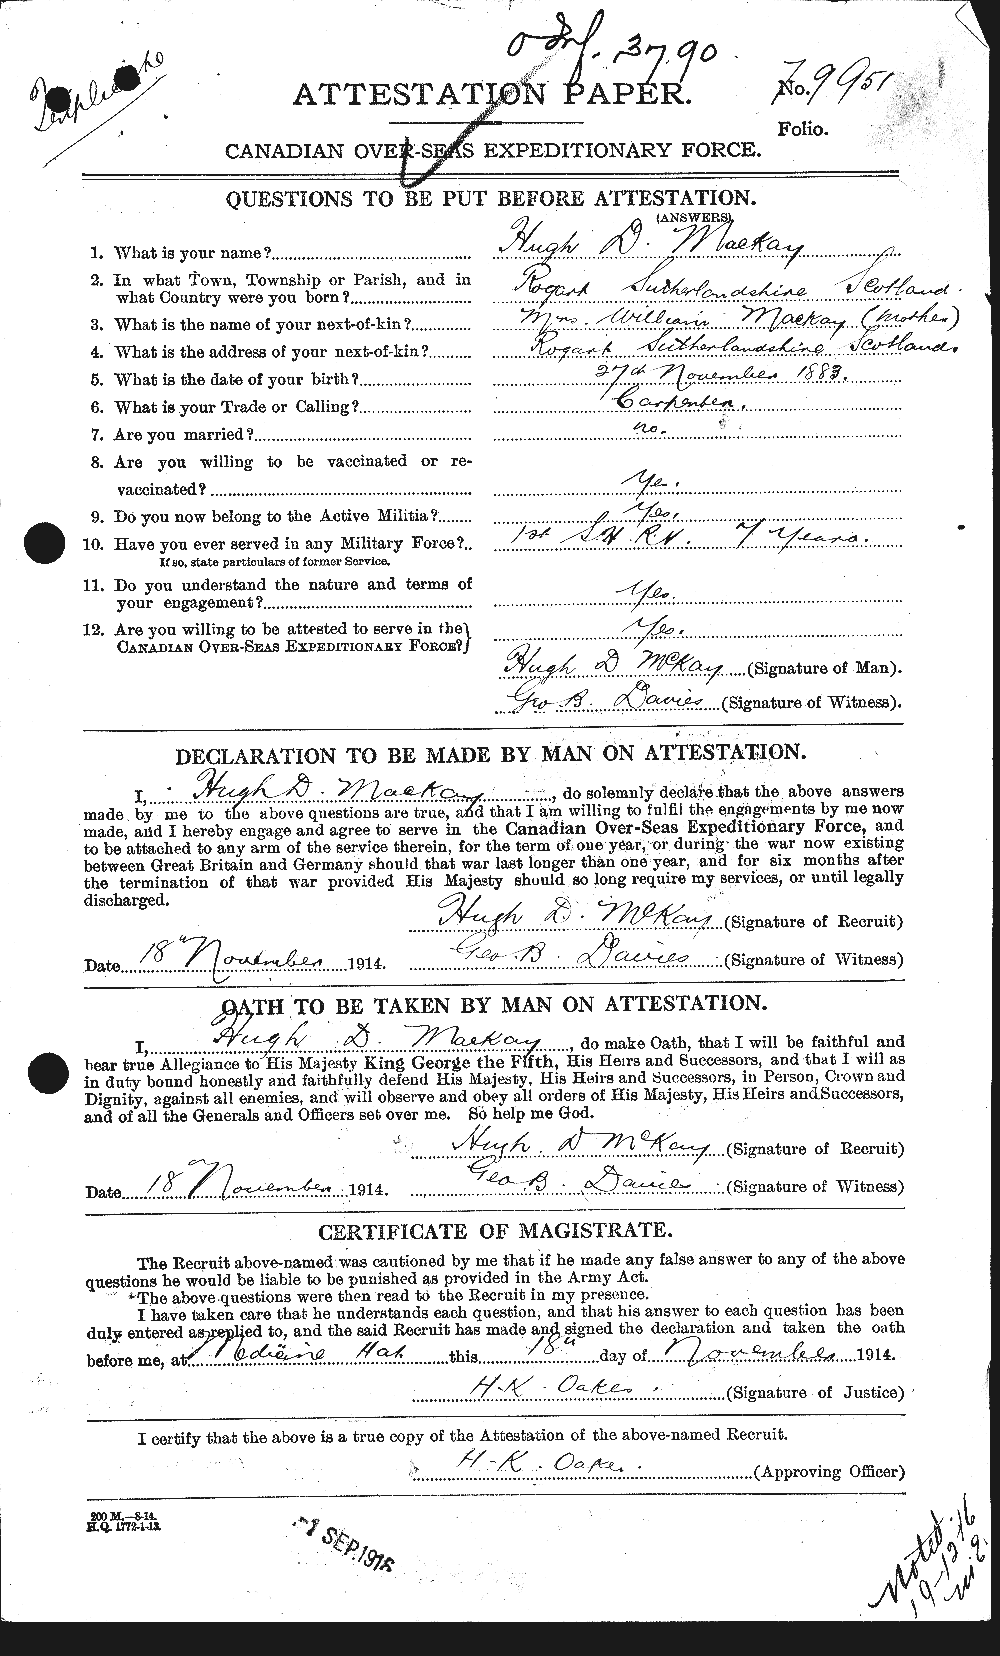 Personnel Records of the First World War - CEF 534776a